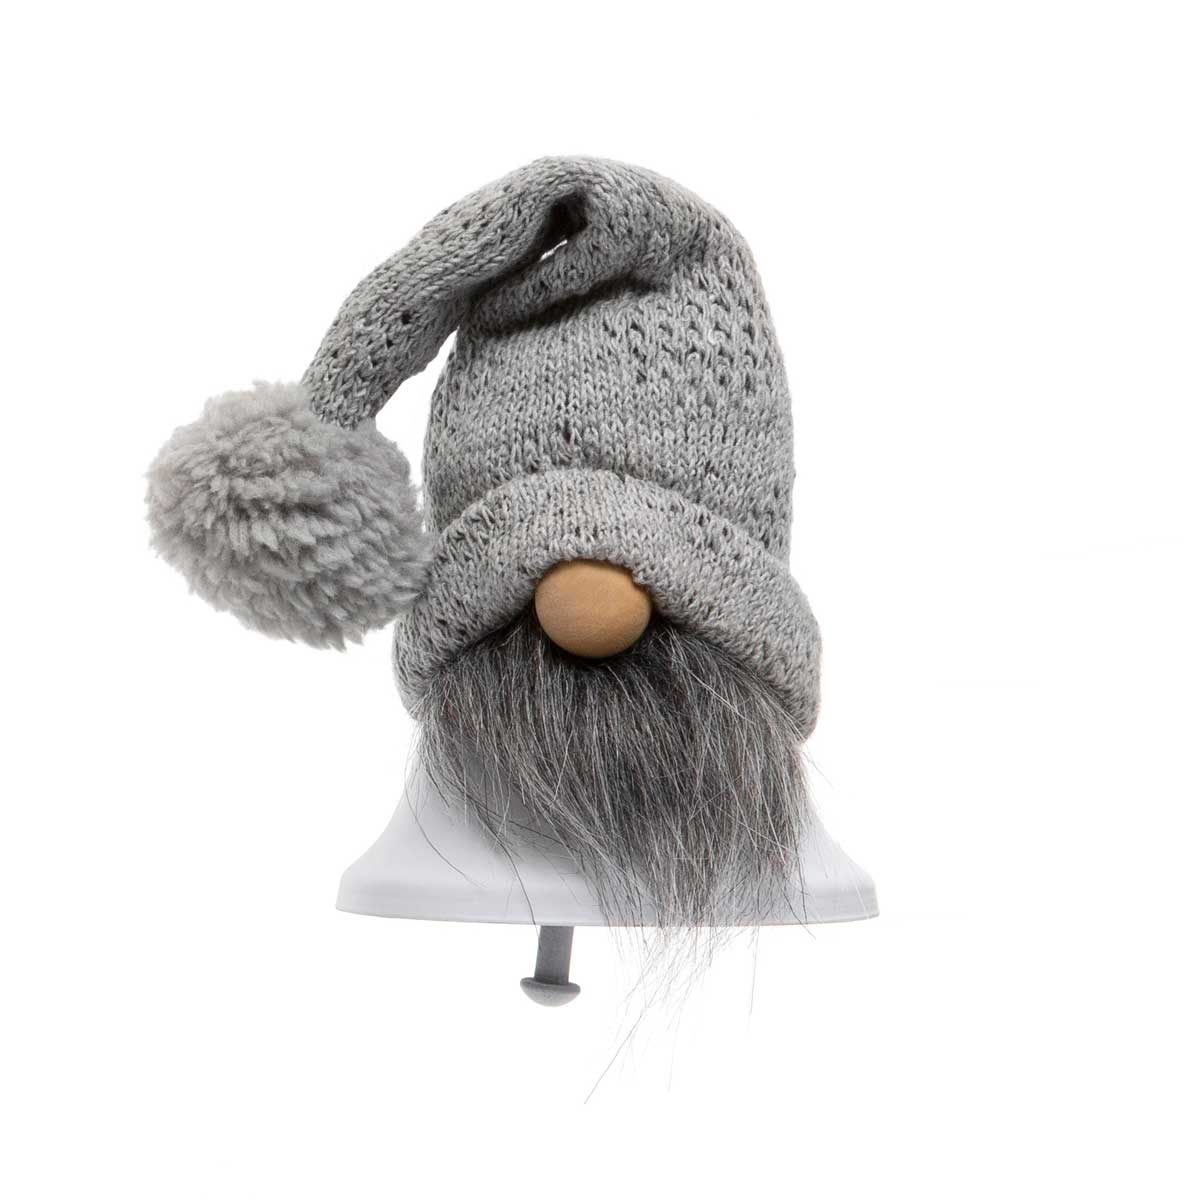 !HOLIDAY CHEER BELL GNOME LARGE GREY